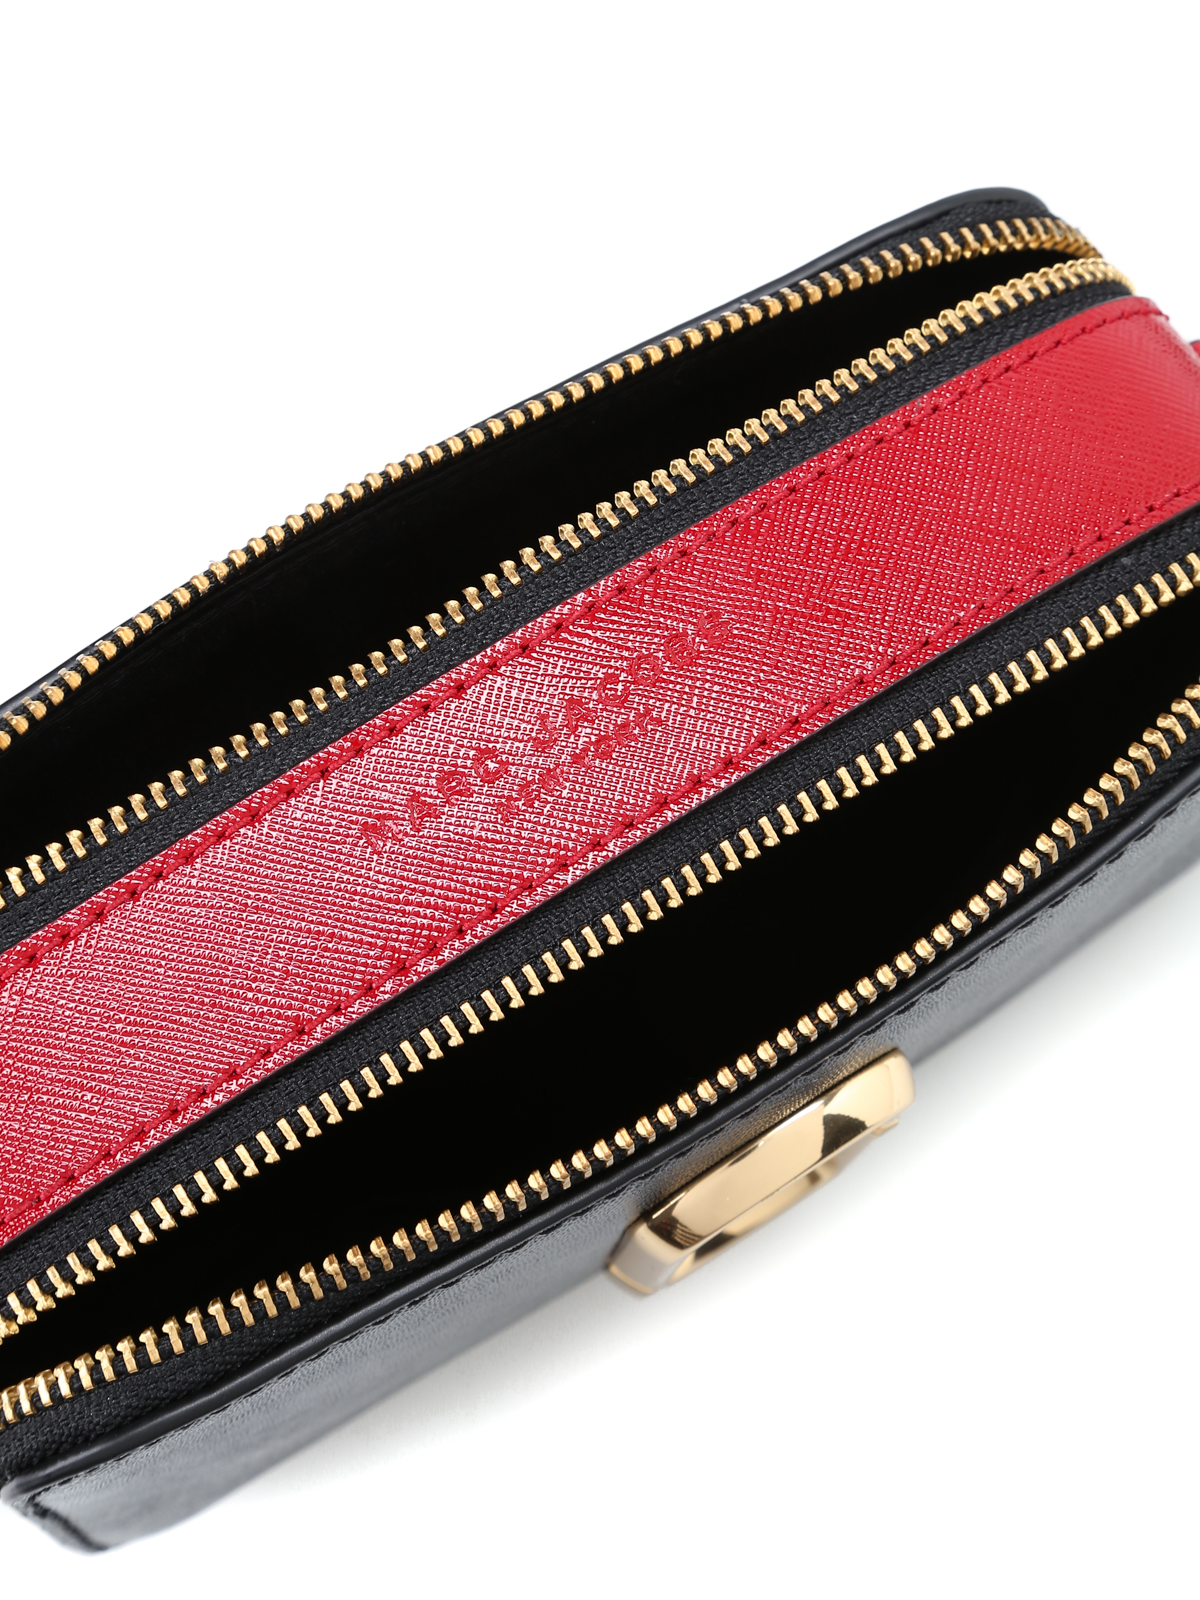 Marc Jacobs Snapshot Crossbody With Chain - Black/red